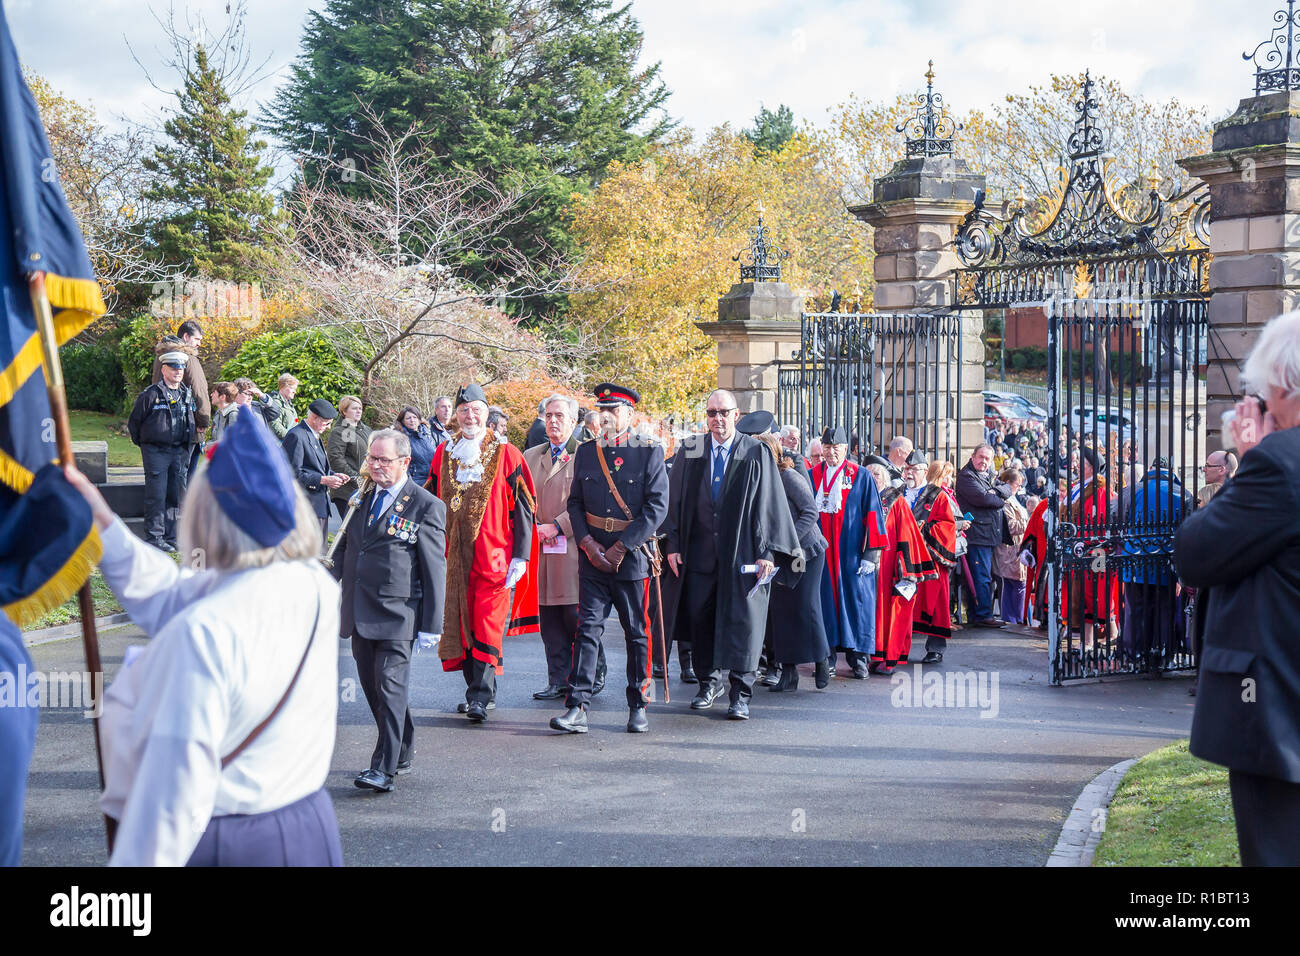 Kidderminster, UK. 11th November, 2018. With acts of remembrance taking place worldwide today, the people of Kidderminster come out in their hundreds to commemorate those who gave their lives for their country. On a gloriously sunny morning, crowds congregate at St Mary and All Saints Church, circling The Angel of Peace war memorial to pay their respects. Credit: Lee Hudson/Alamy Live News Stock Photo